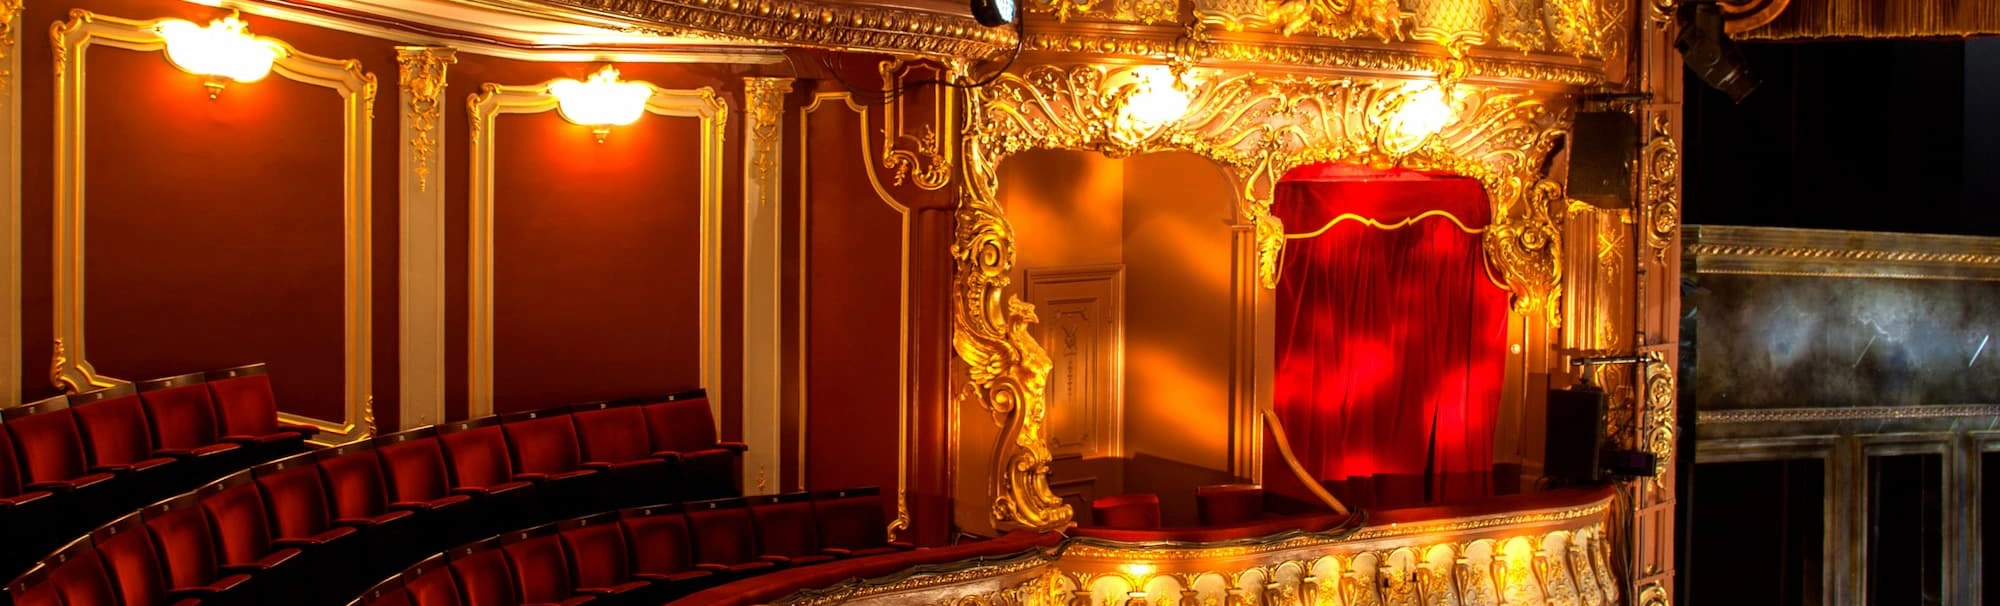 Theatre by QE2